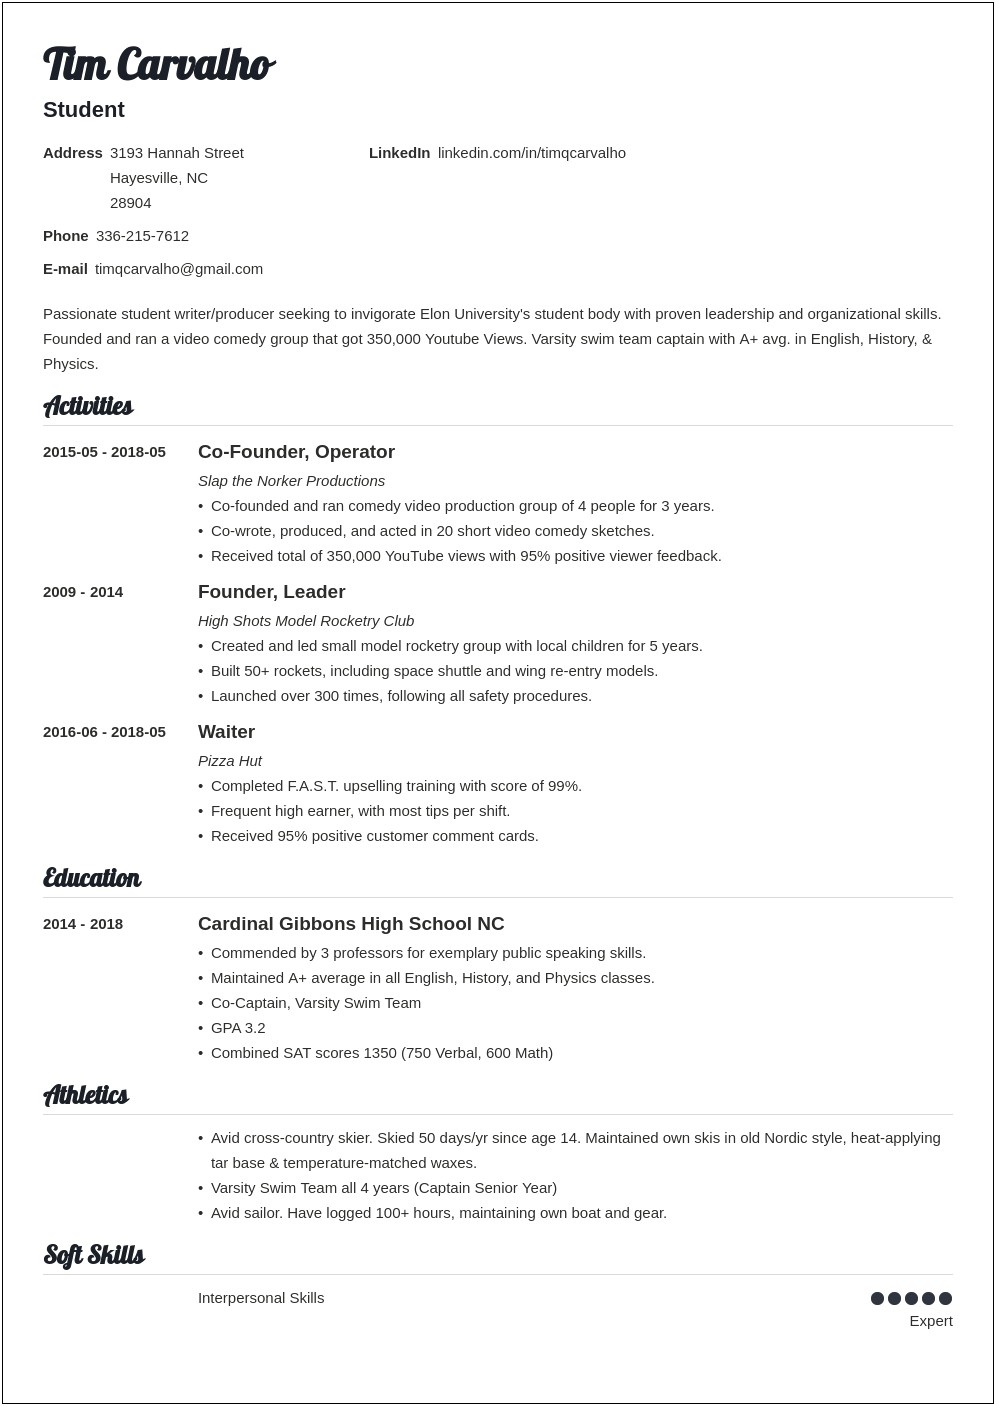 Resume Objective Examples For Higher Education